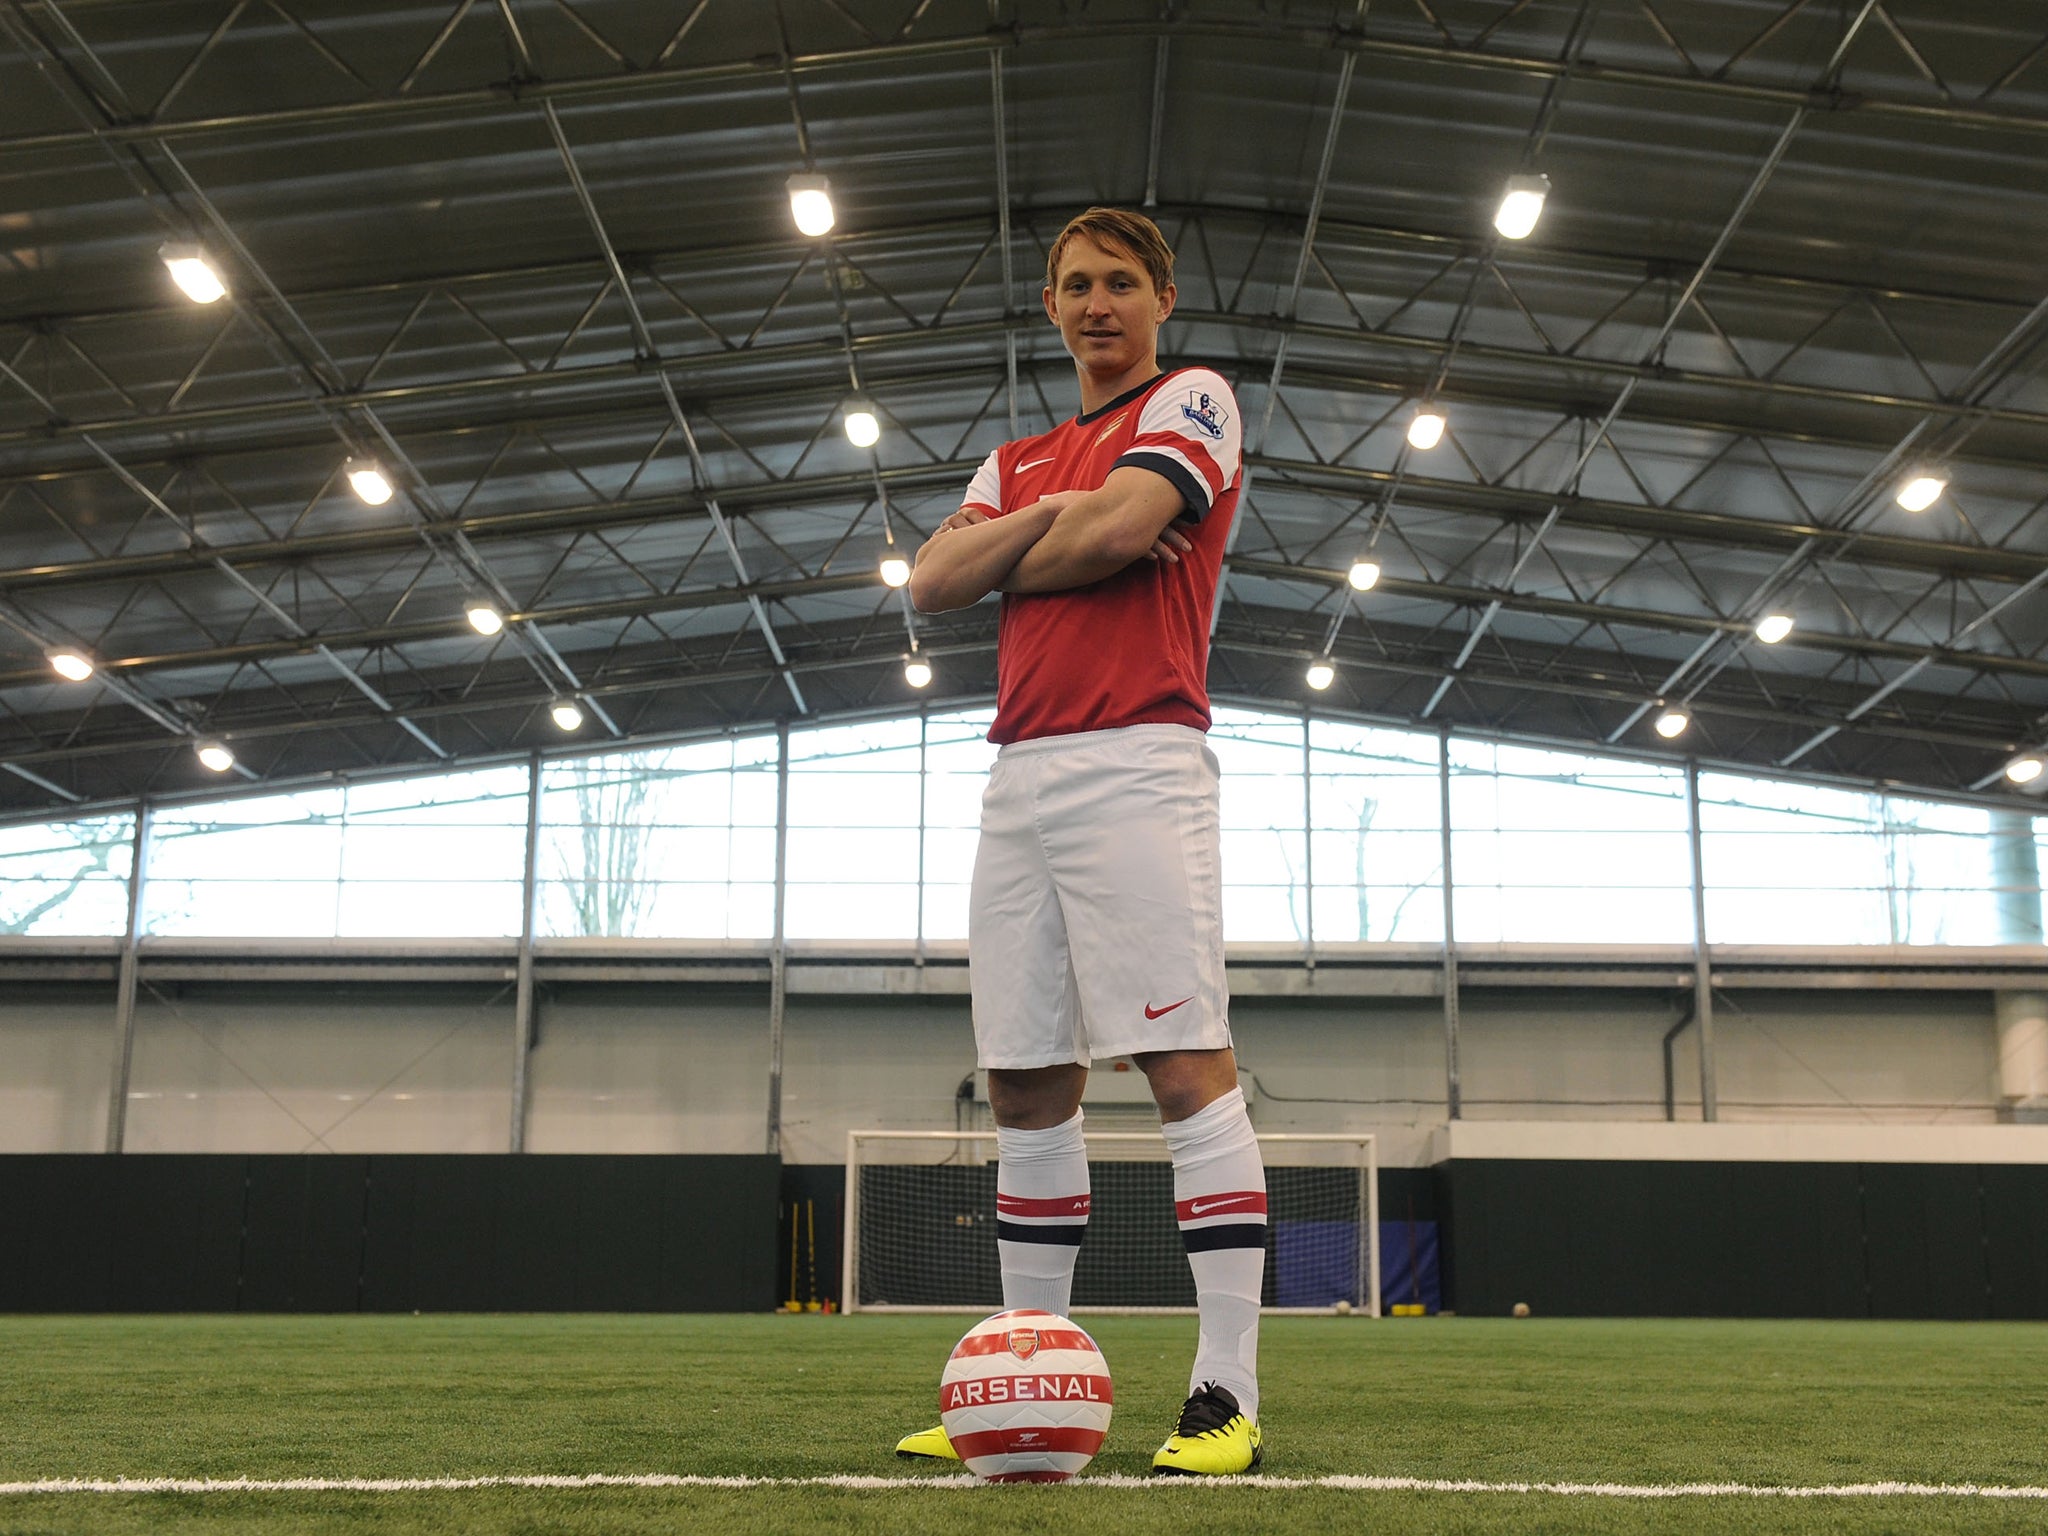 Arsenal unveil their new Kim Kallstrom from Spartak Moscow - but he could be out for six weeks